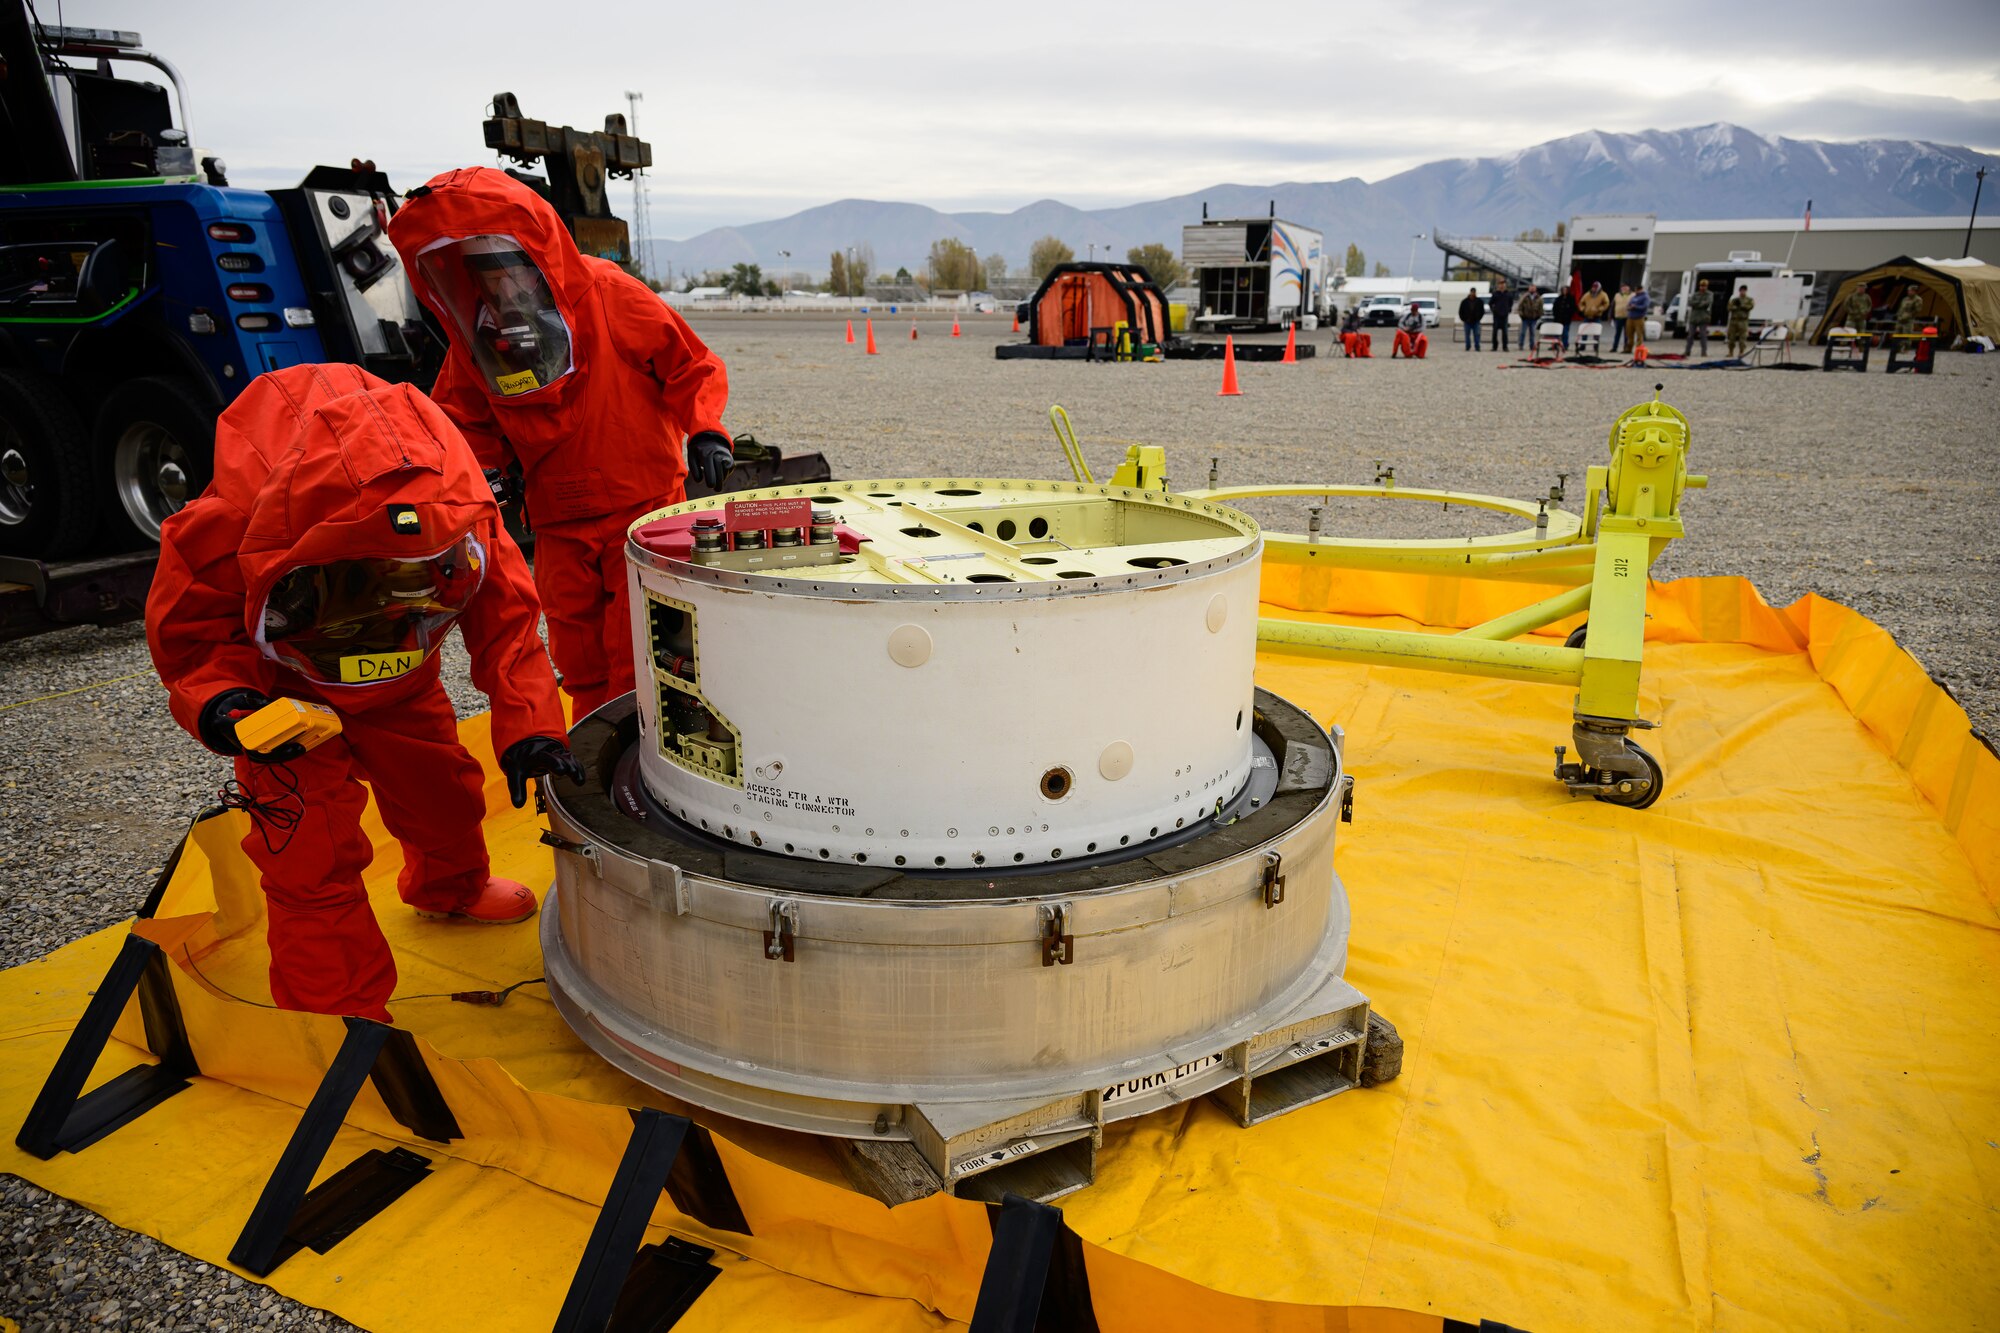 Members of the Missile Mishap Recovery Team take atmospheric samples during an exercise simulating a transportation accident involving a missile component containing hazardous material at the Box Elder County Fairgrounds, Tremonton, Utah, Nov. 2, 2023. The MMRT is on call 24/7, 365 days a year to respond to any number of situations involving an intercontinental ballistic missile where technical procedures do not exist to address the mishap or the loss of life is possible. (U.S. Air Force photo by R. Nial Bradshaw)